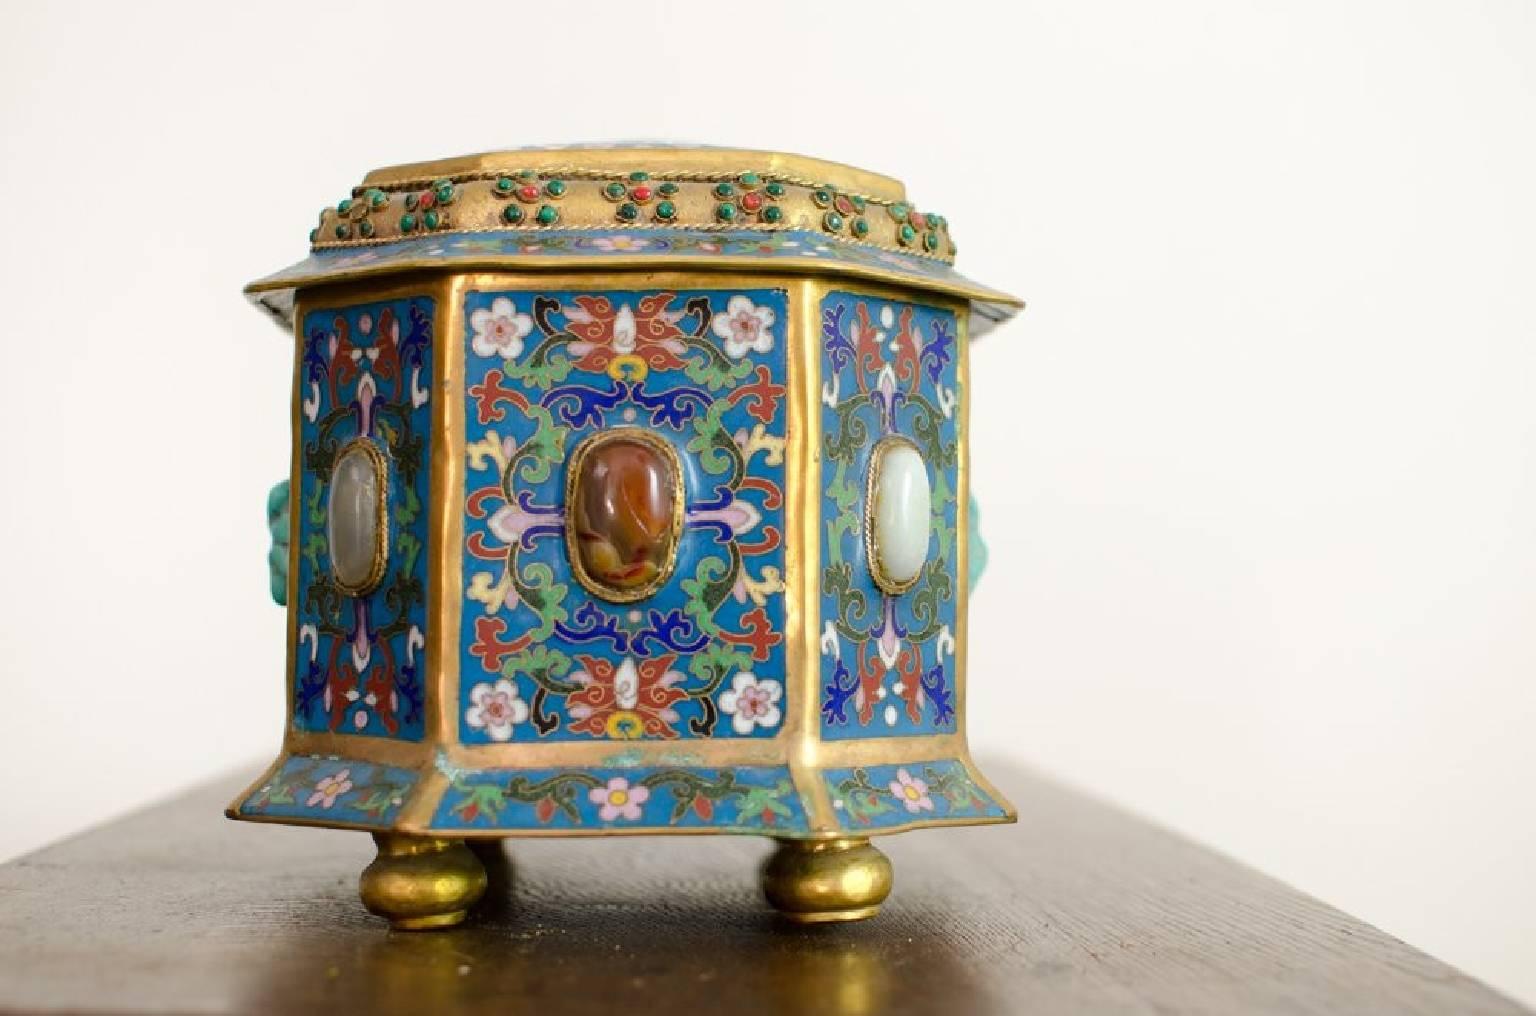 20th Century Chinese Hardstone Inlaid Cloisonne Enameled Gilt Metal Casket For Sale